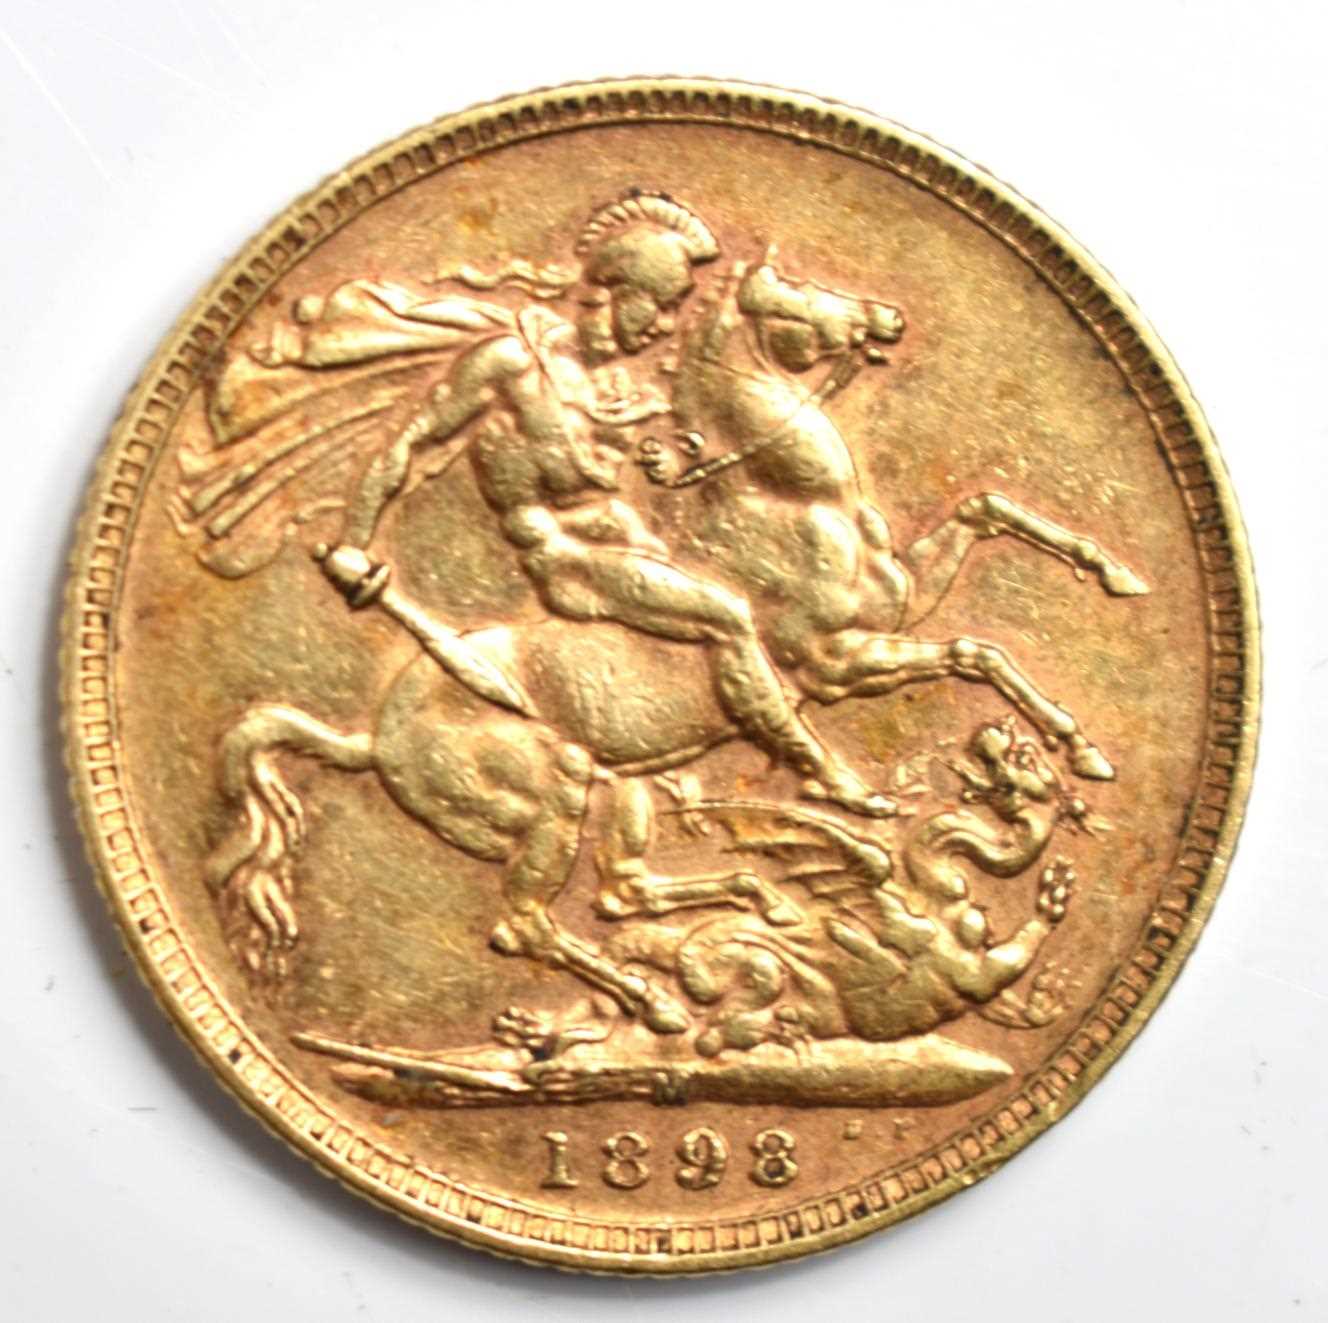 A Queen Victoria full gold sovereign, veiled head, Melbourne mint mark, dated 1898. - Image 2 of 3